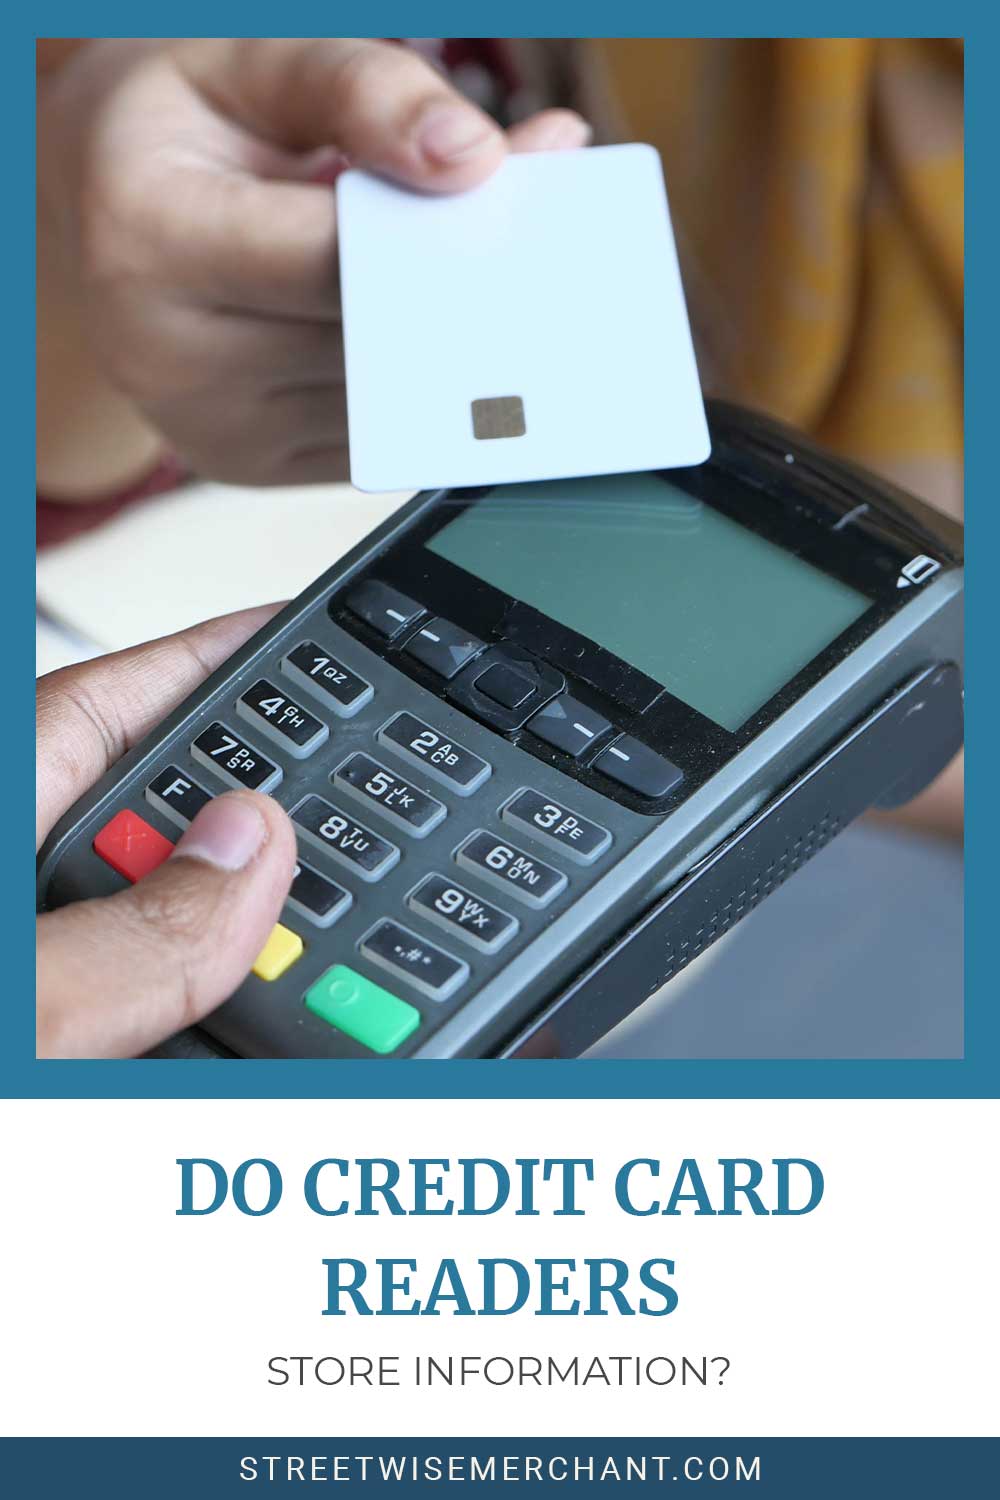 Do Credit Card Readers Store Information?